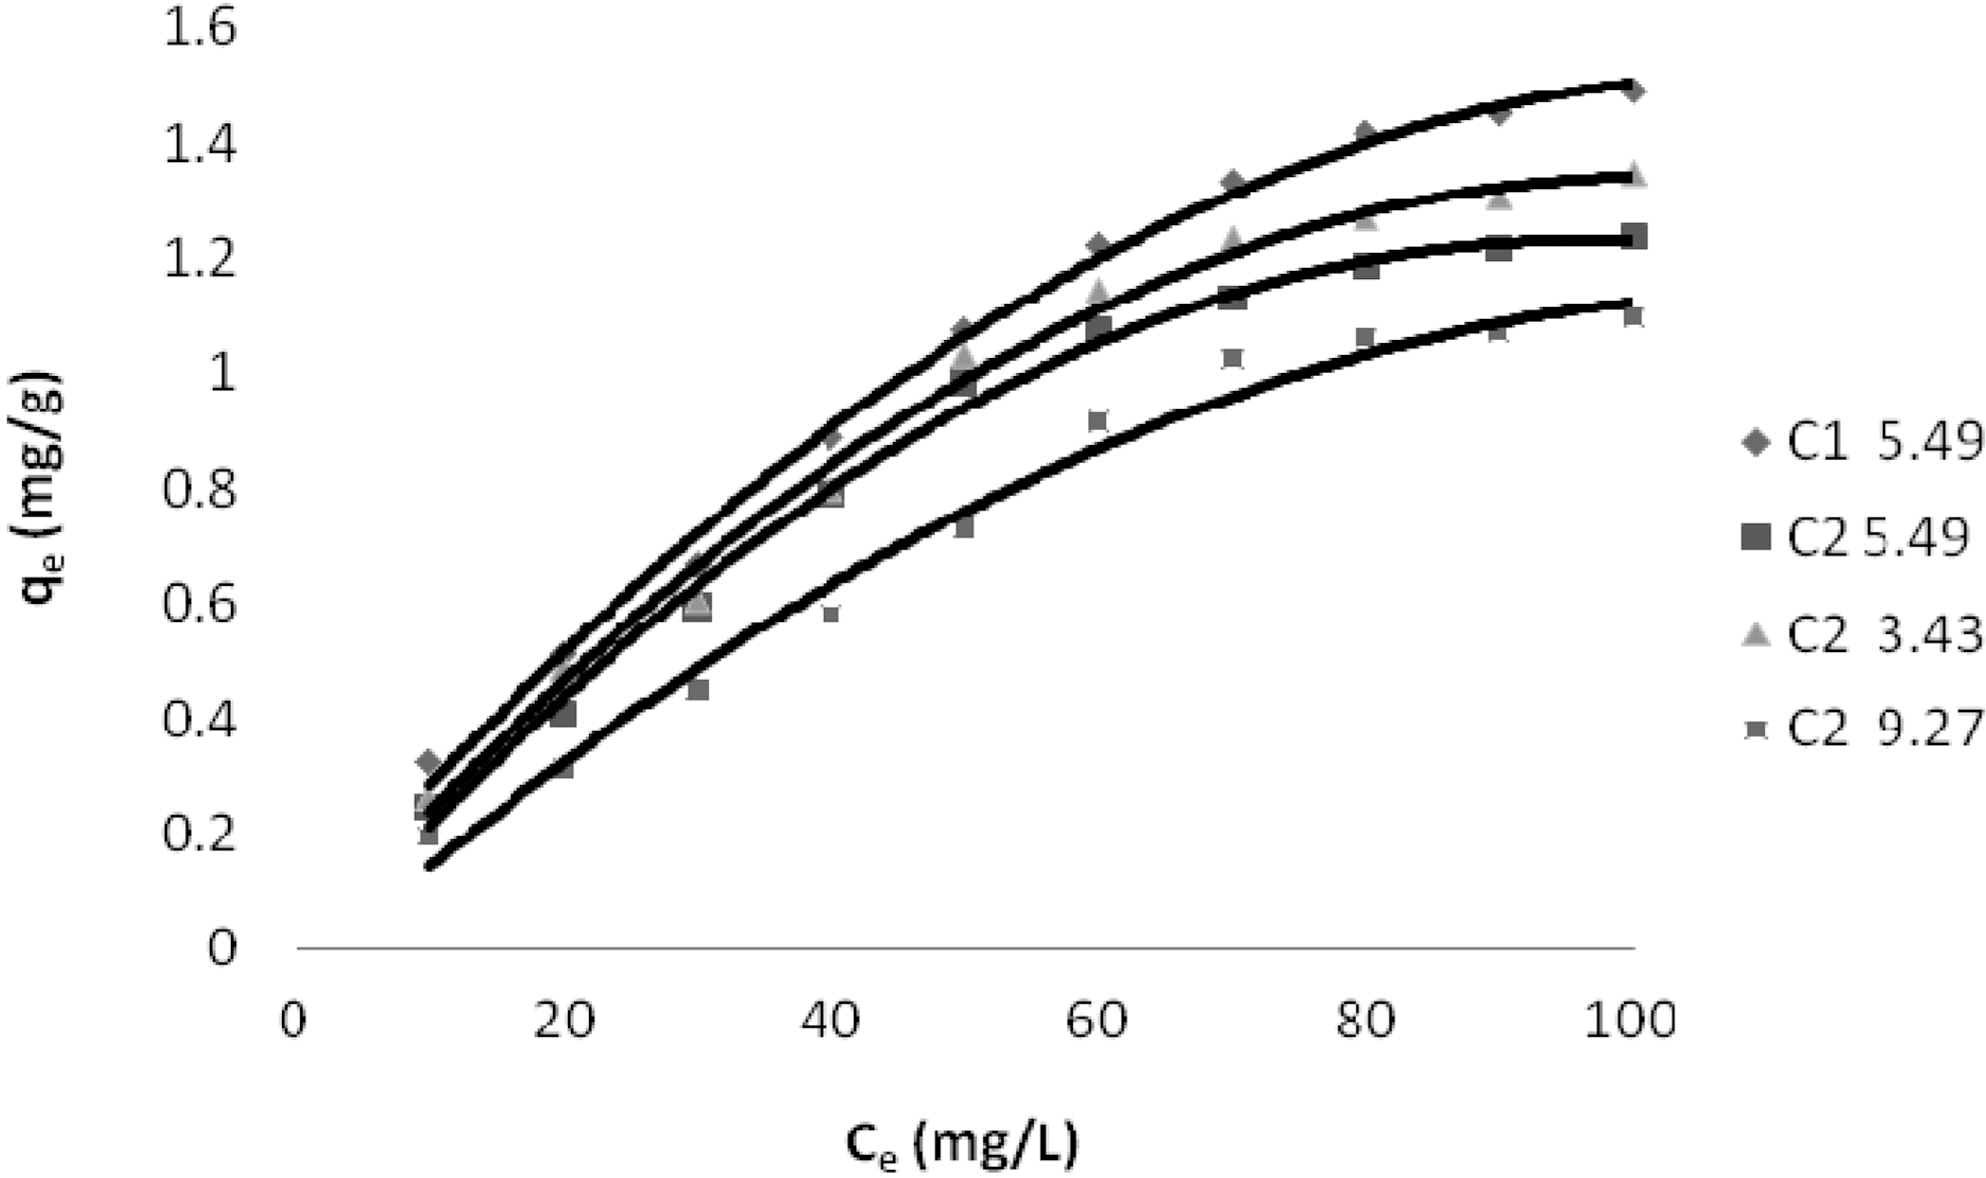 Adsorption Isotherm for dye Reactive Blue 221 on C1 & C2 at different pH values.